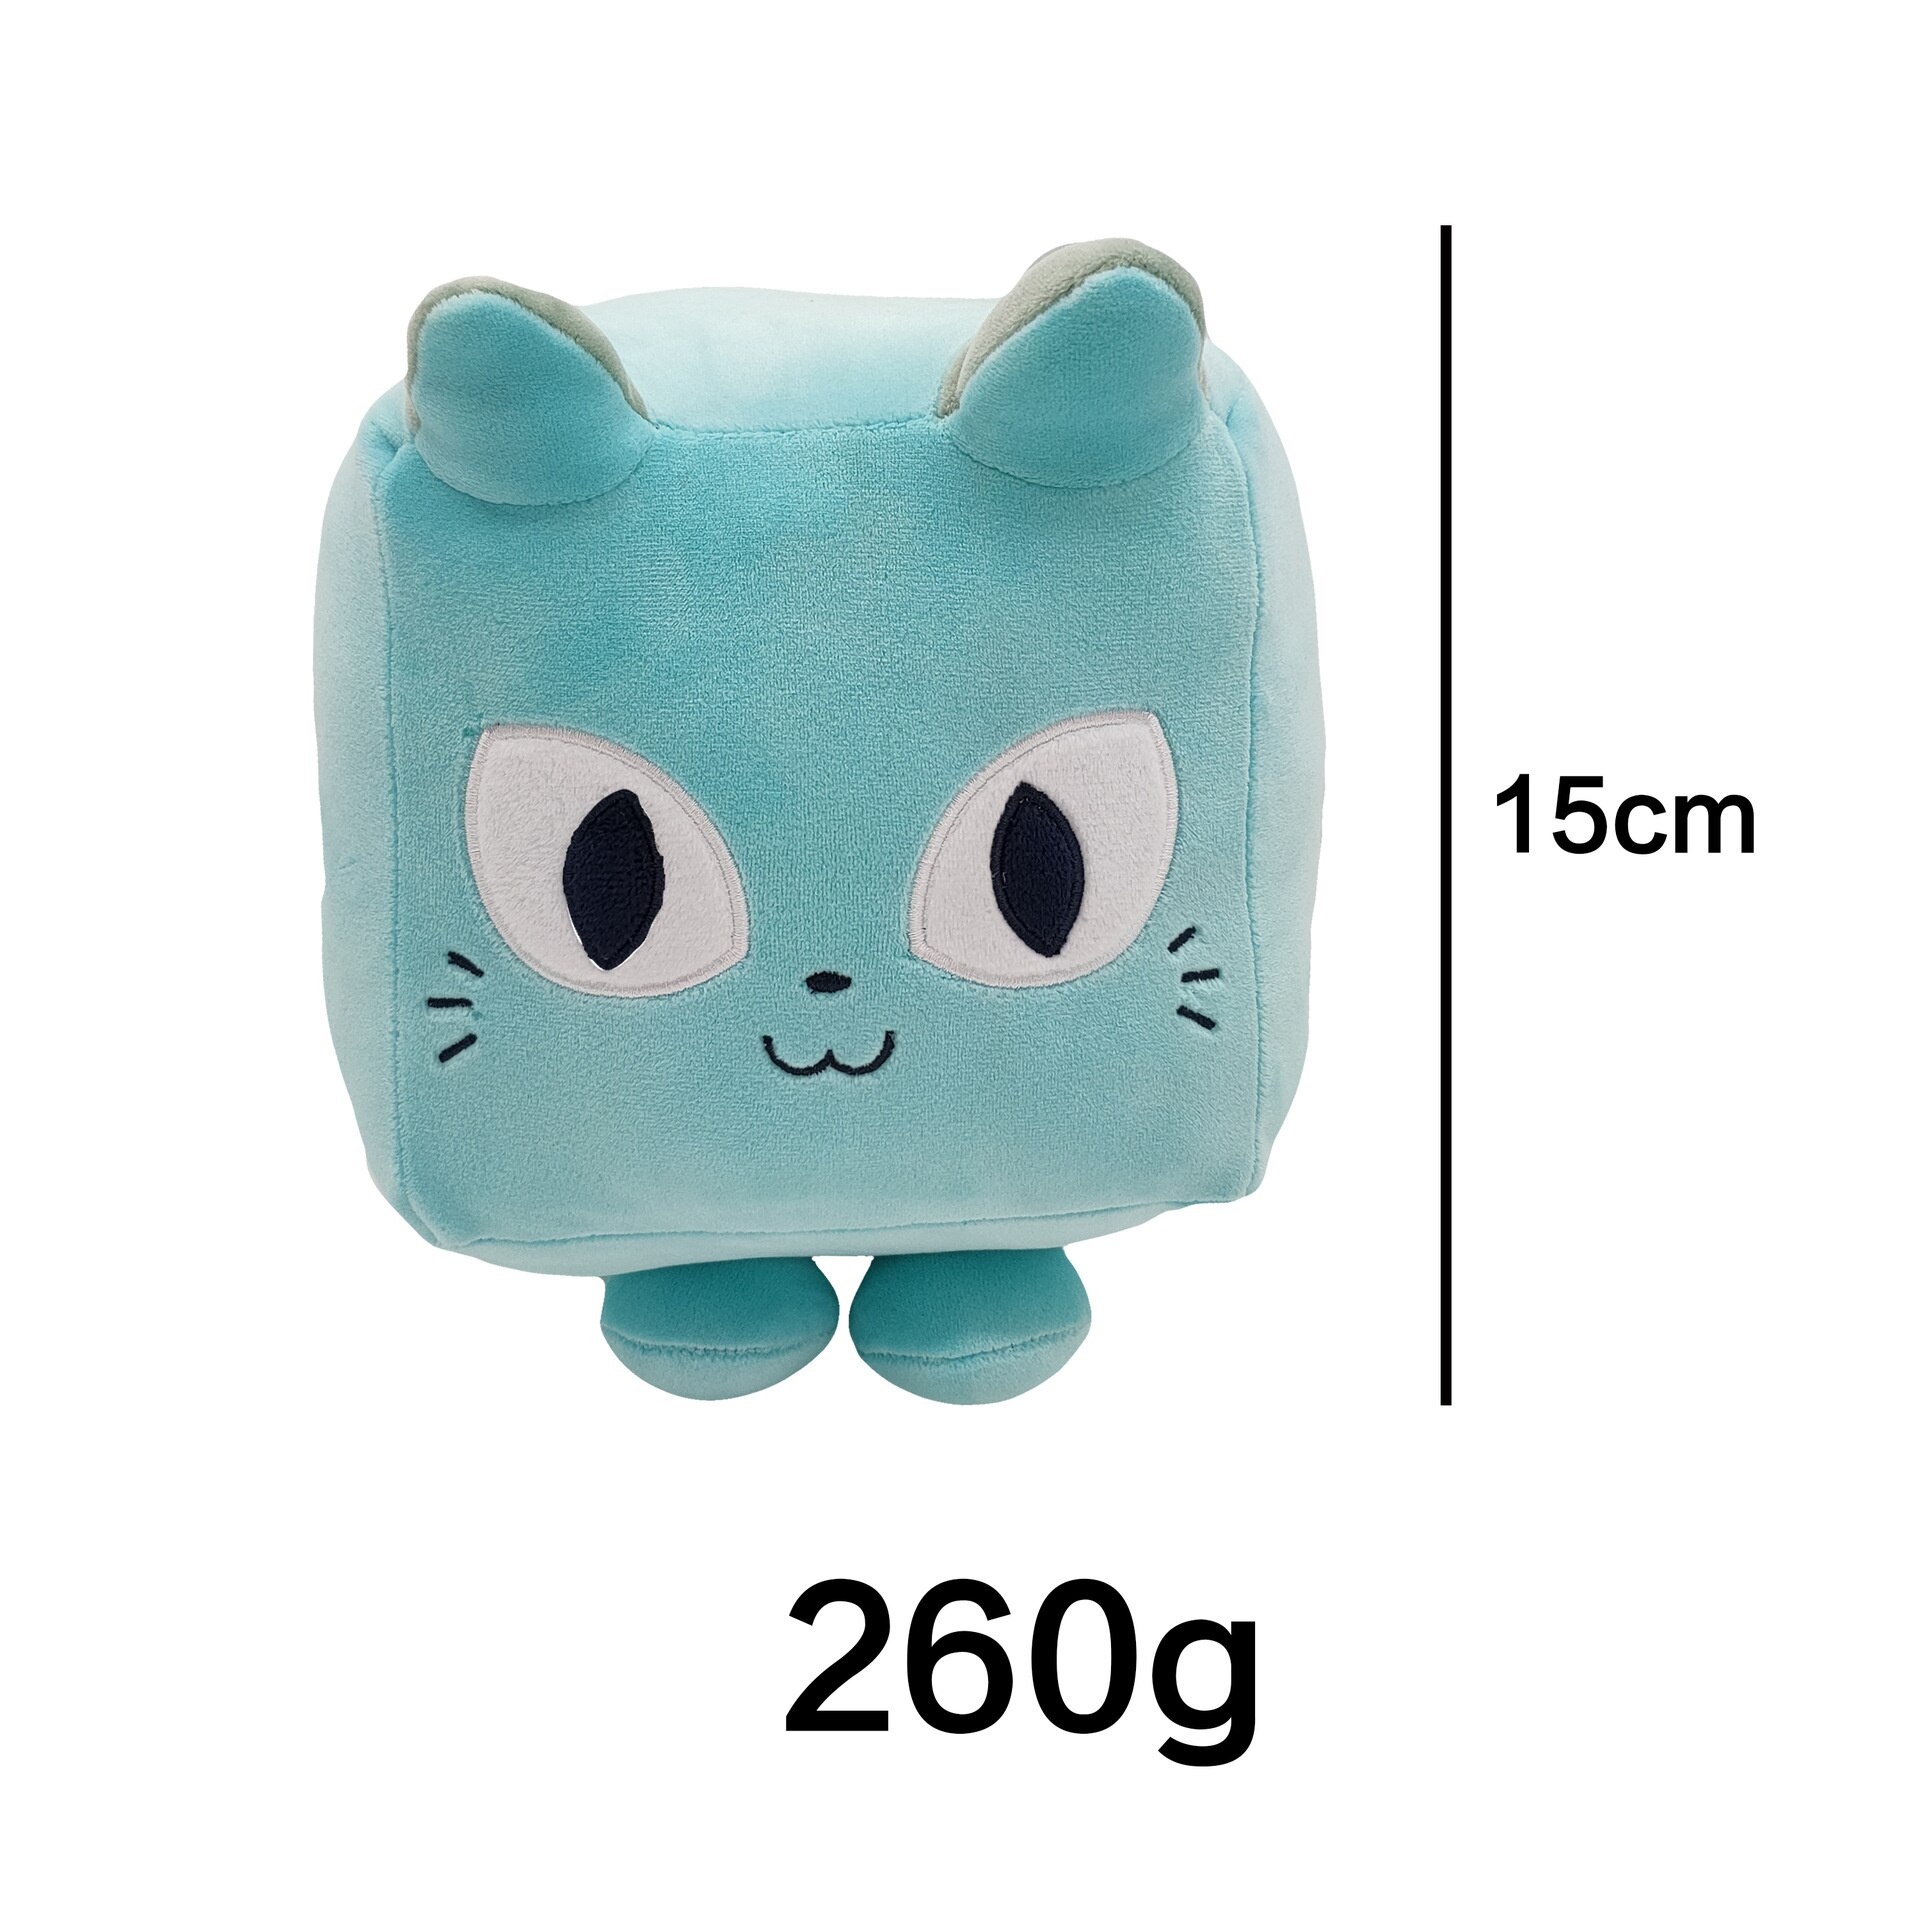 Big Games Cat Plush Toy Pet Simulator X Cat Stuffed Doll Soft Animal Plushie Sleeping Pillow for Kids Fans Birthday Collection